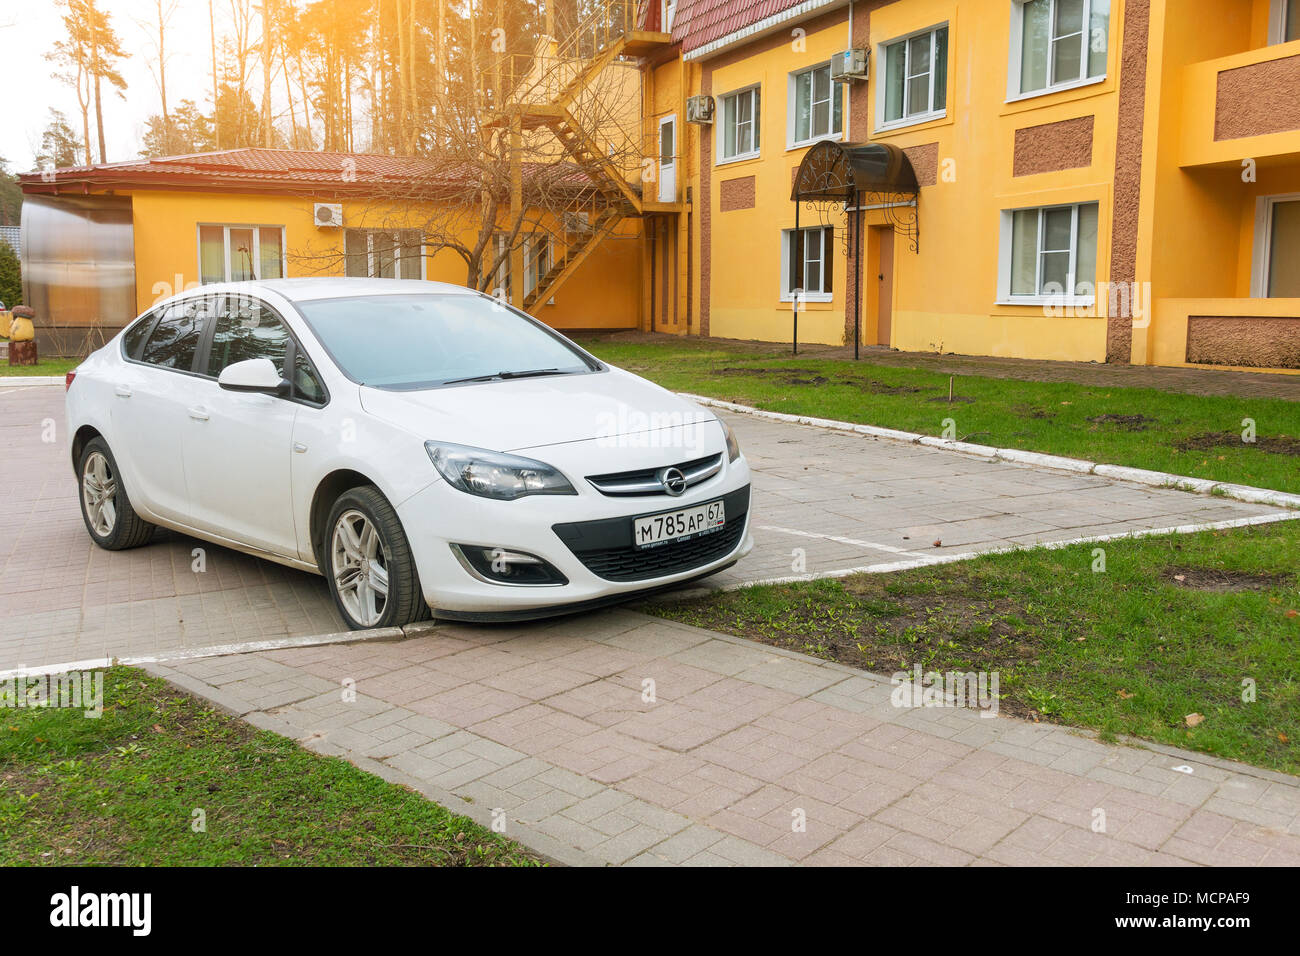 Smolensk, Russia - April 25, 2017: New Opel Astra parked near house on the street of Smolensk City. Stock Photo